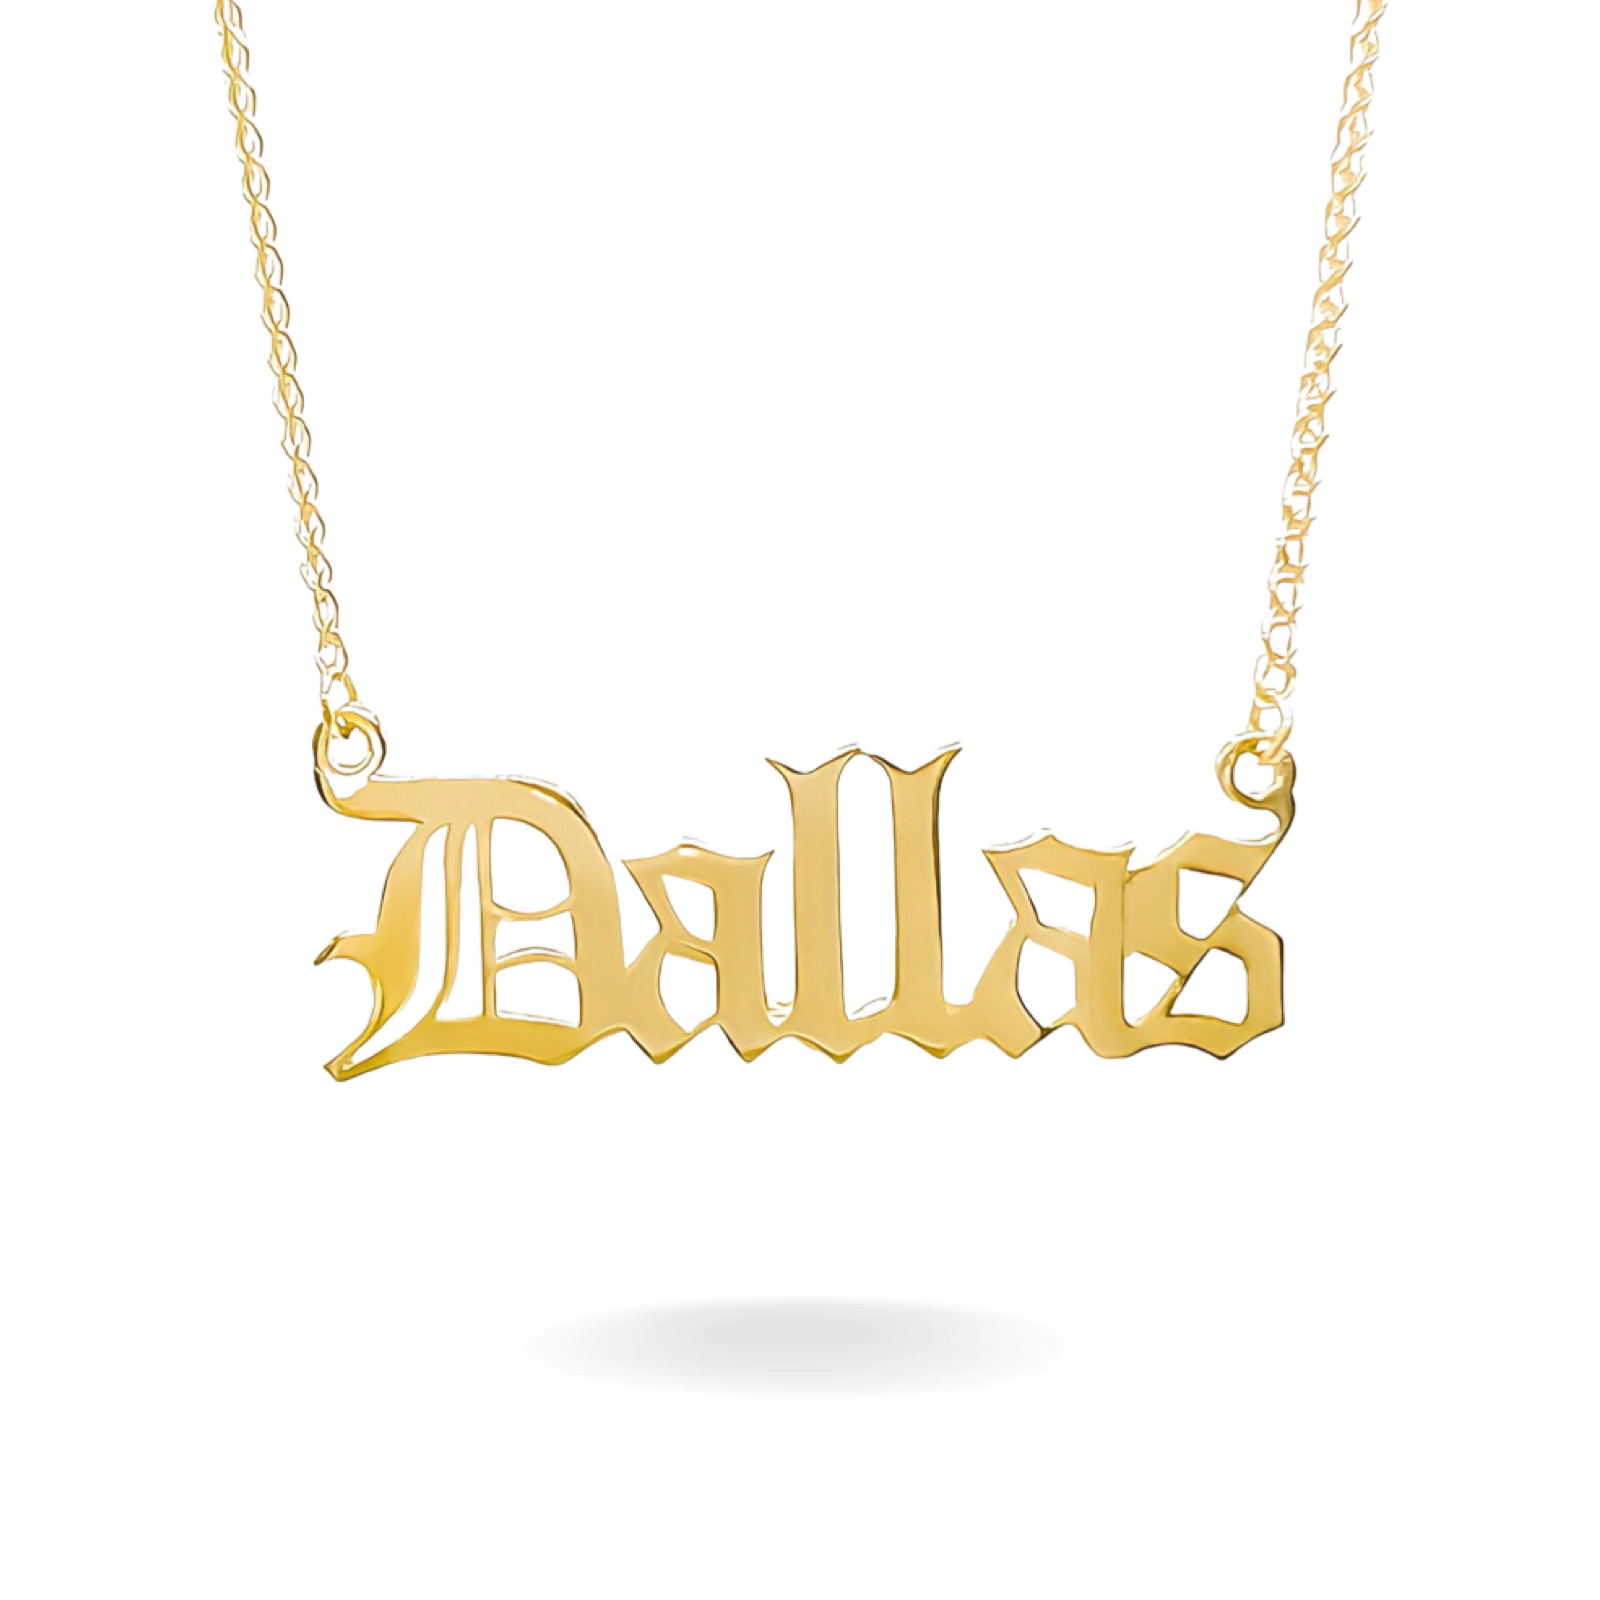 14K YELLOW GOLD OLD ENGLISH FLOATING NAME NECKLACE